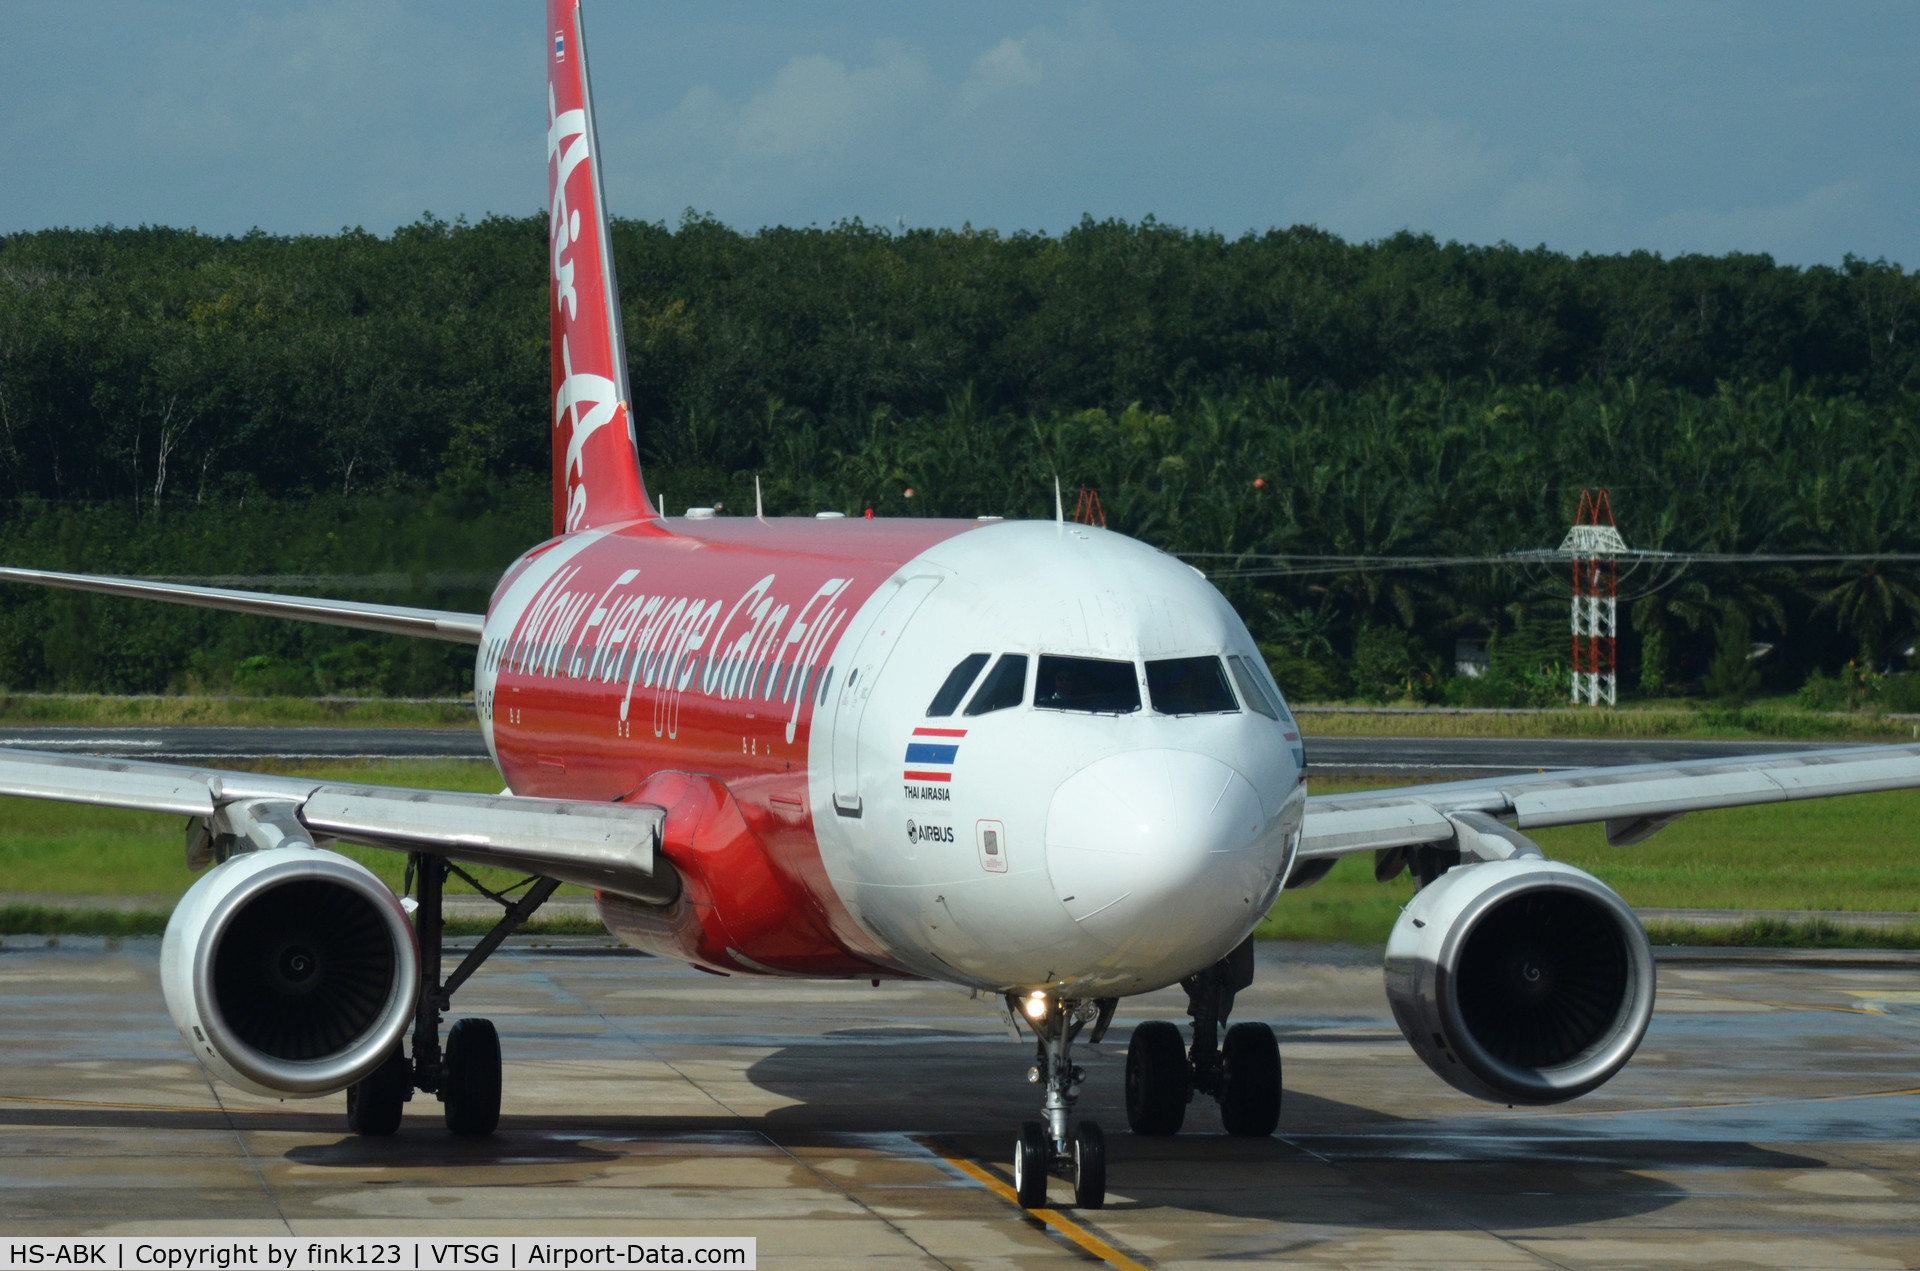 HS-ABK, 2009 Airbus A320-216 C/N 4088, Air asia taxing to the gate